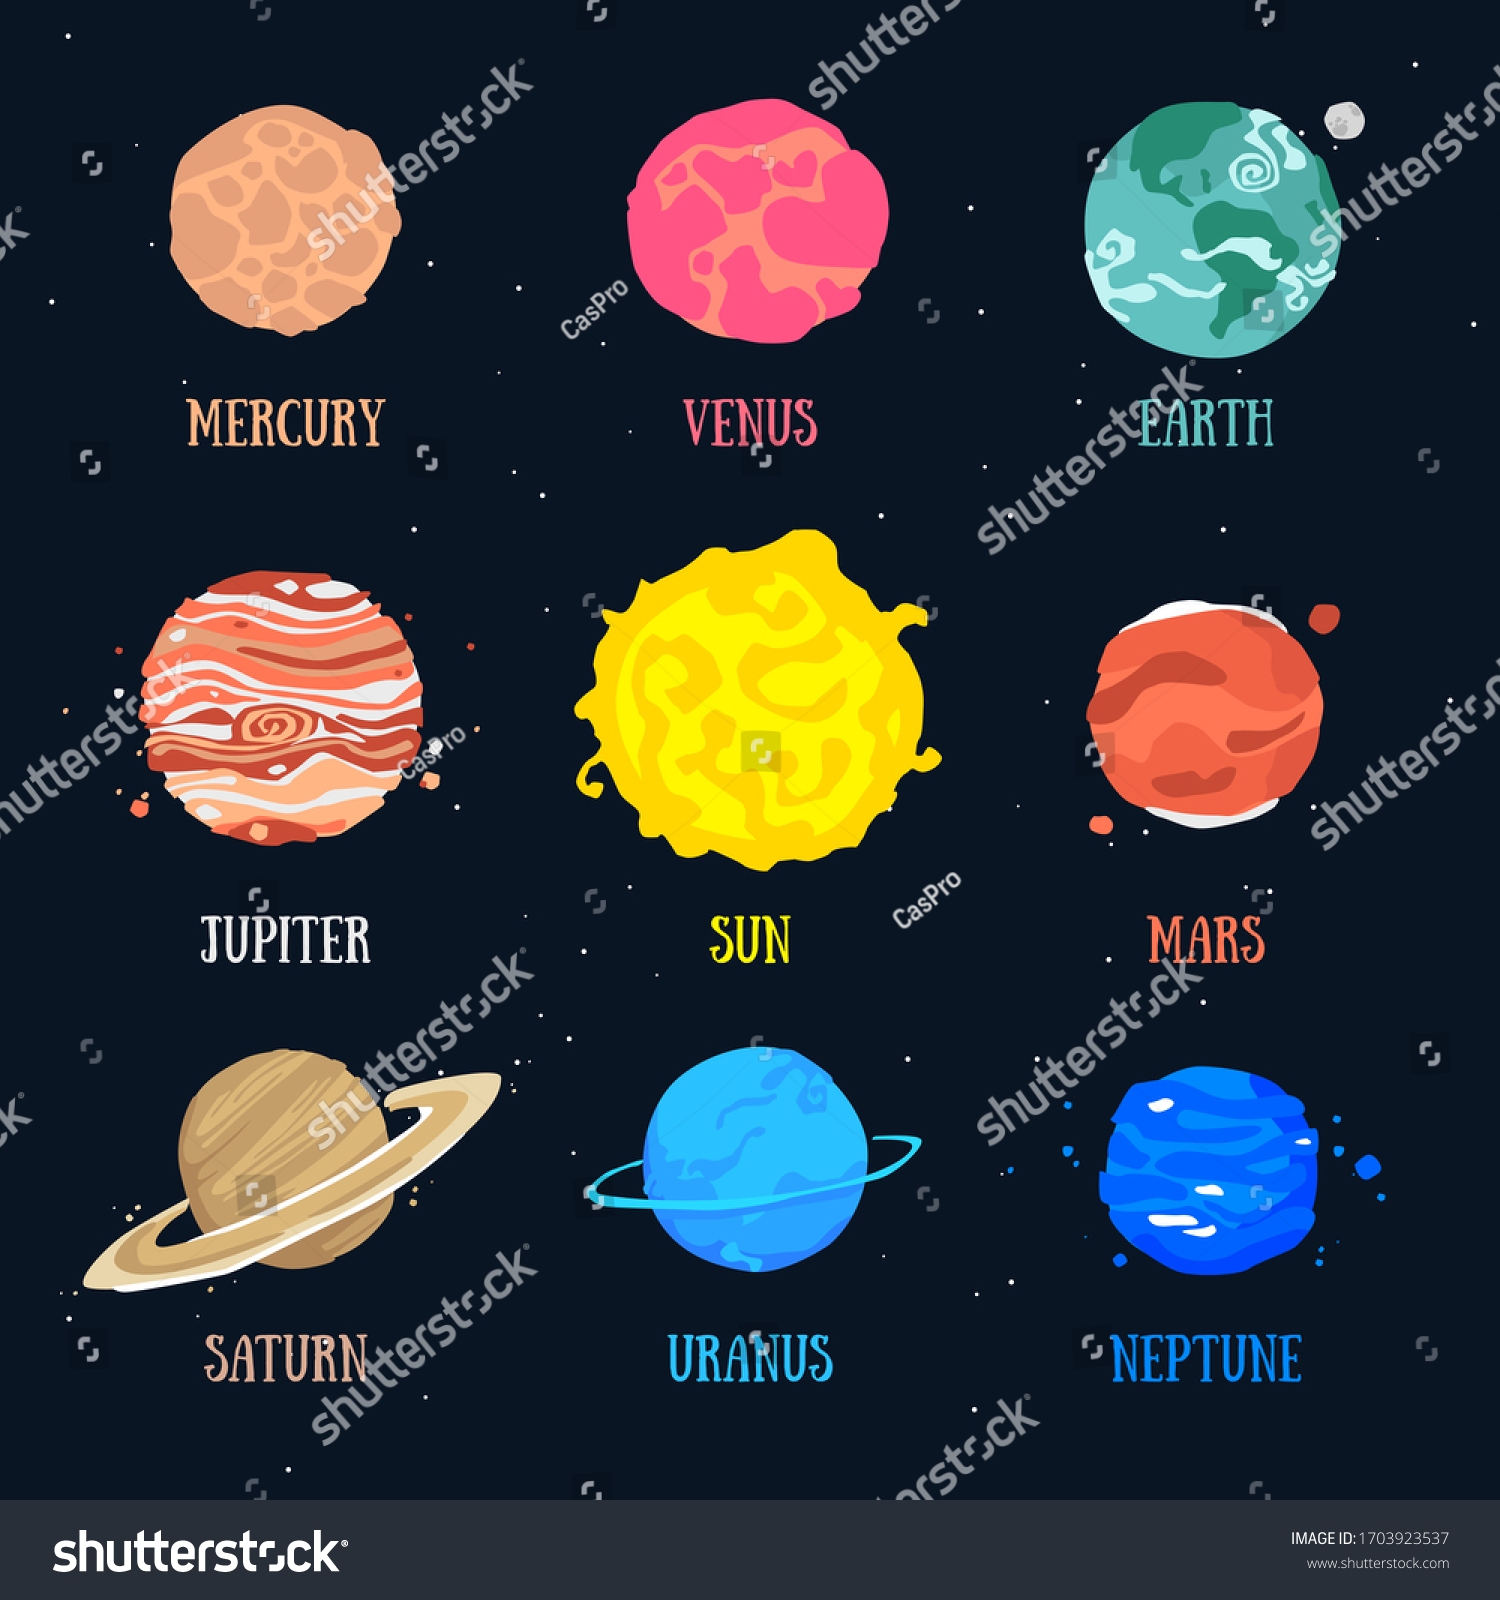 Image Planets Solar System Cartoon Style Stock Vector (Royalty Free ...